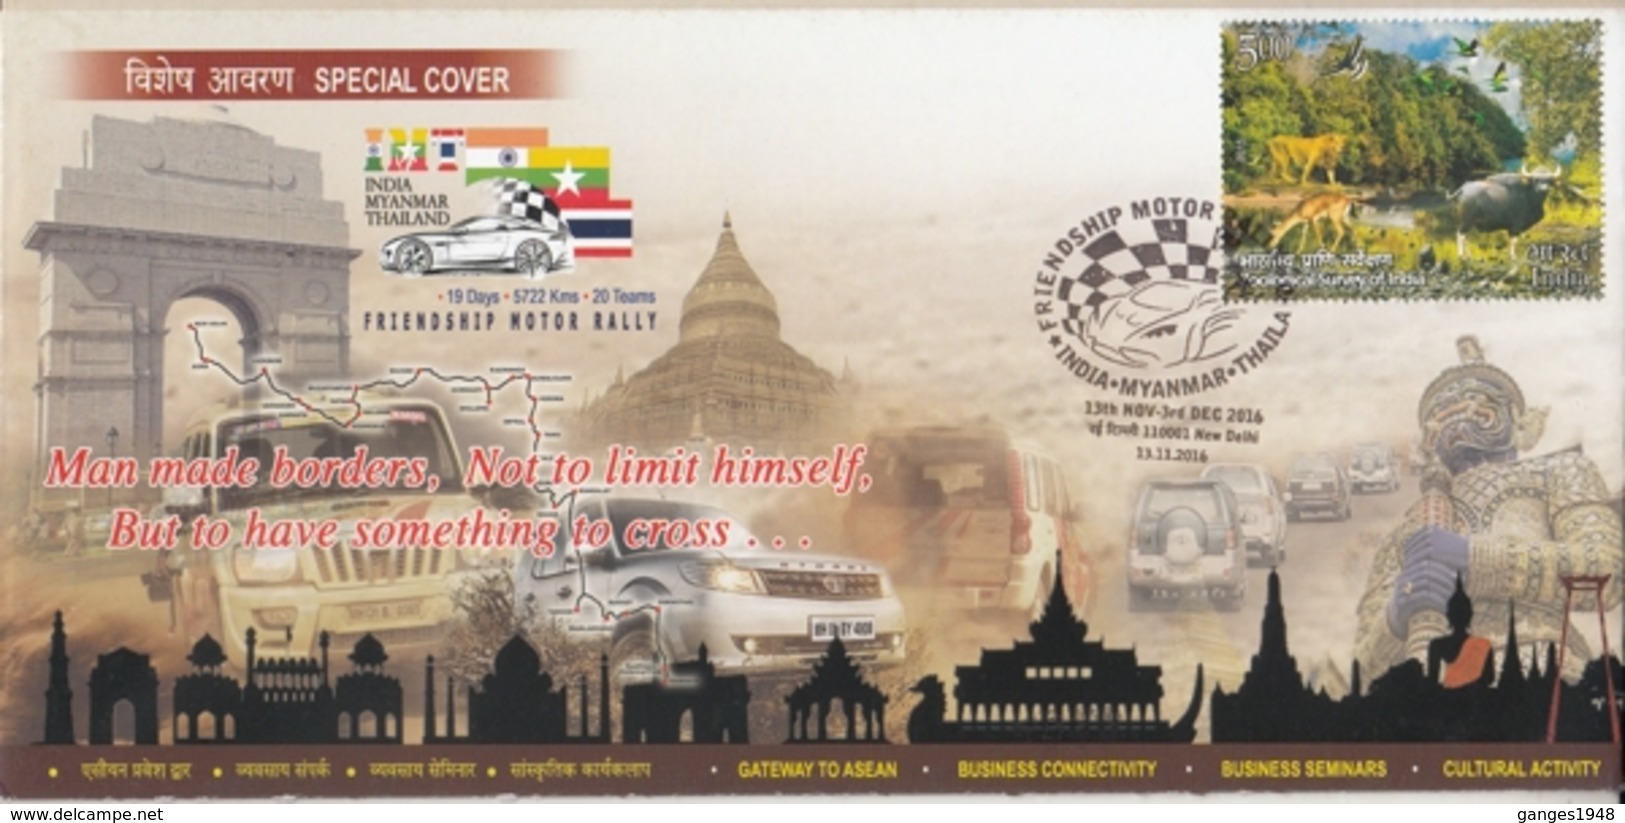 India  2016  Car  India Myanmar Thailand Friendship Motor Rally  ND  Special Cover   # 16484  D  Inde Indien - Cars